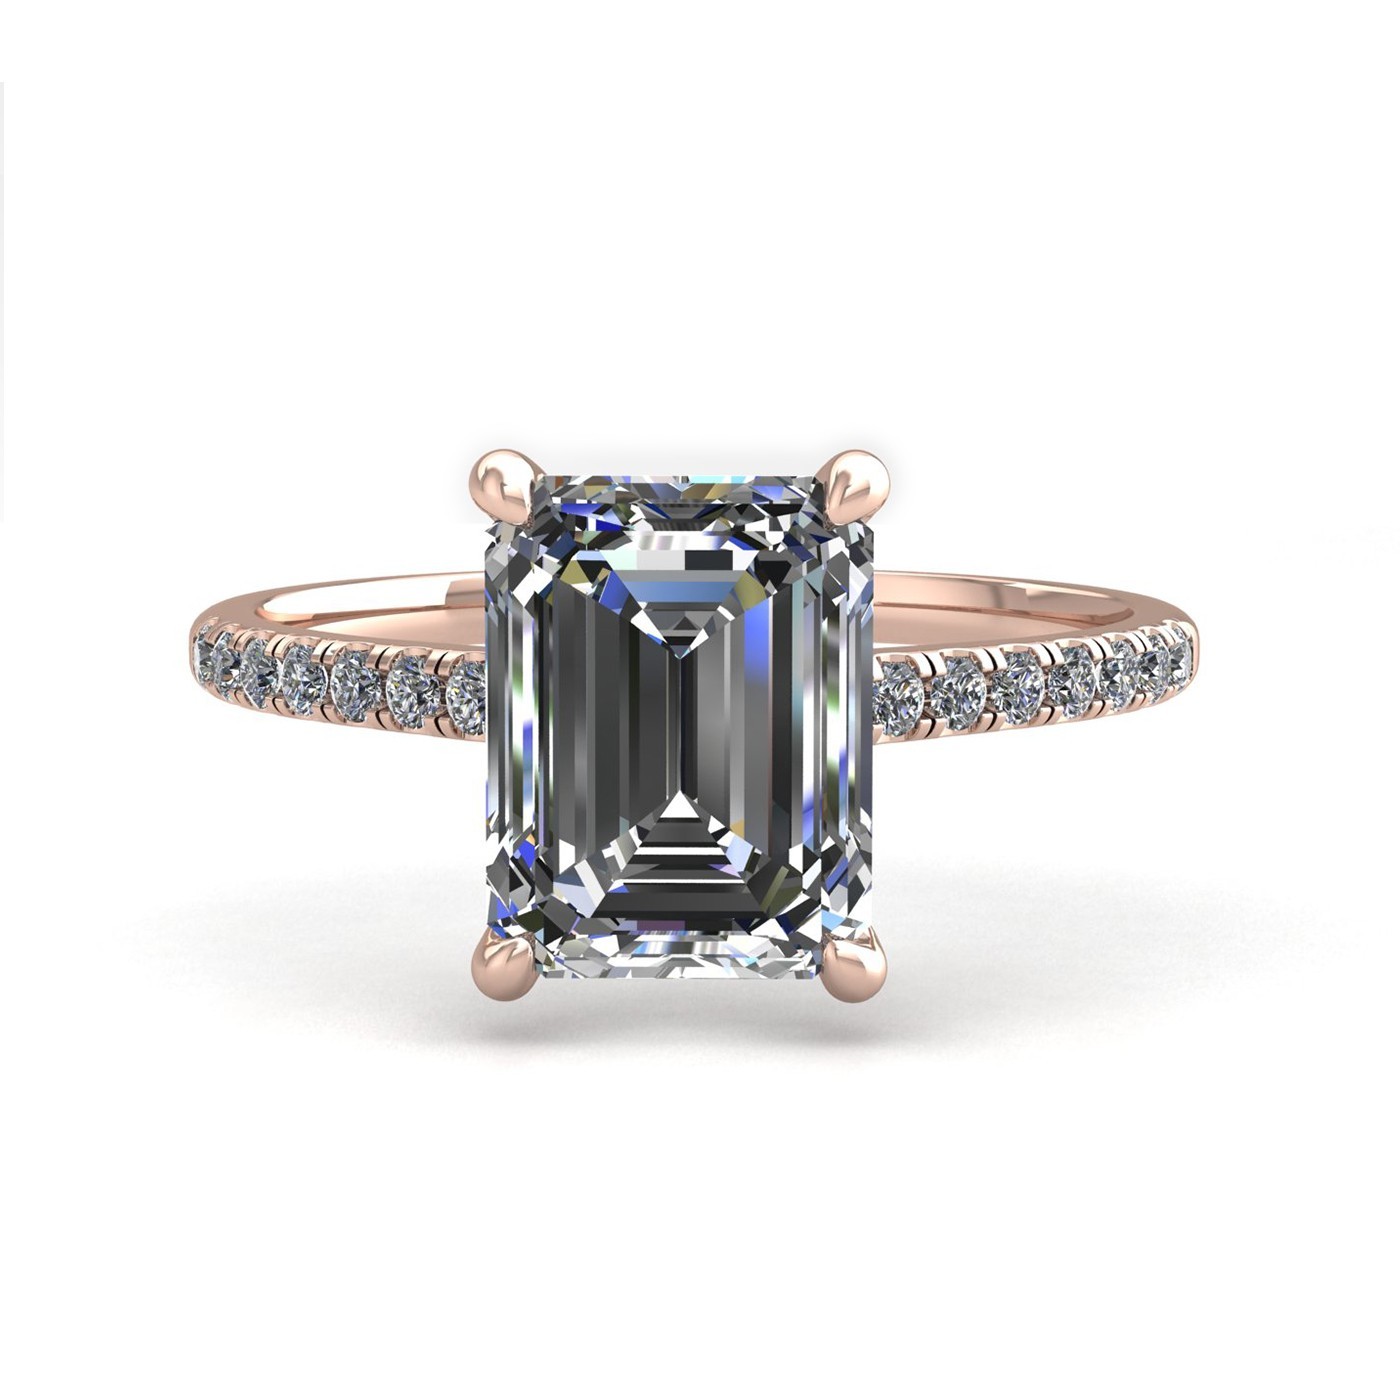 18k yellow gold 2.0ct 4 prongs emerald cut diamond engagement ring with whisper thin pavÉ set band Photos & images